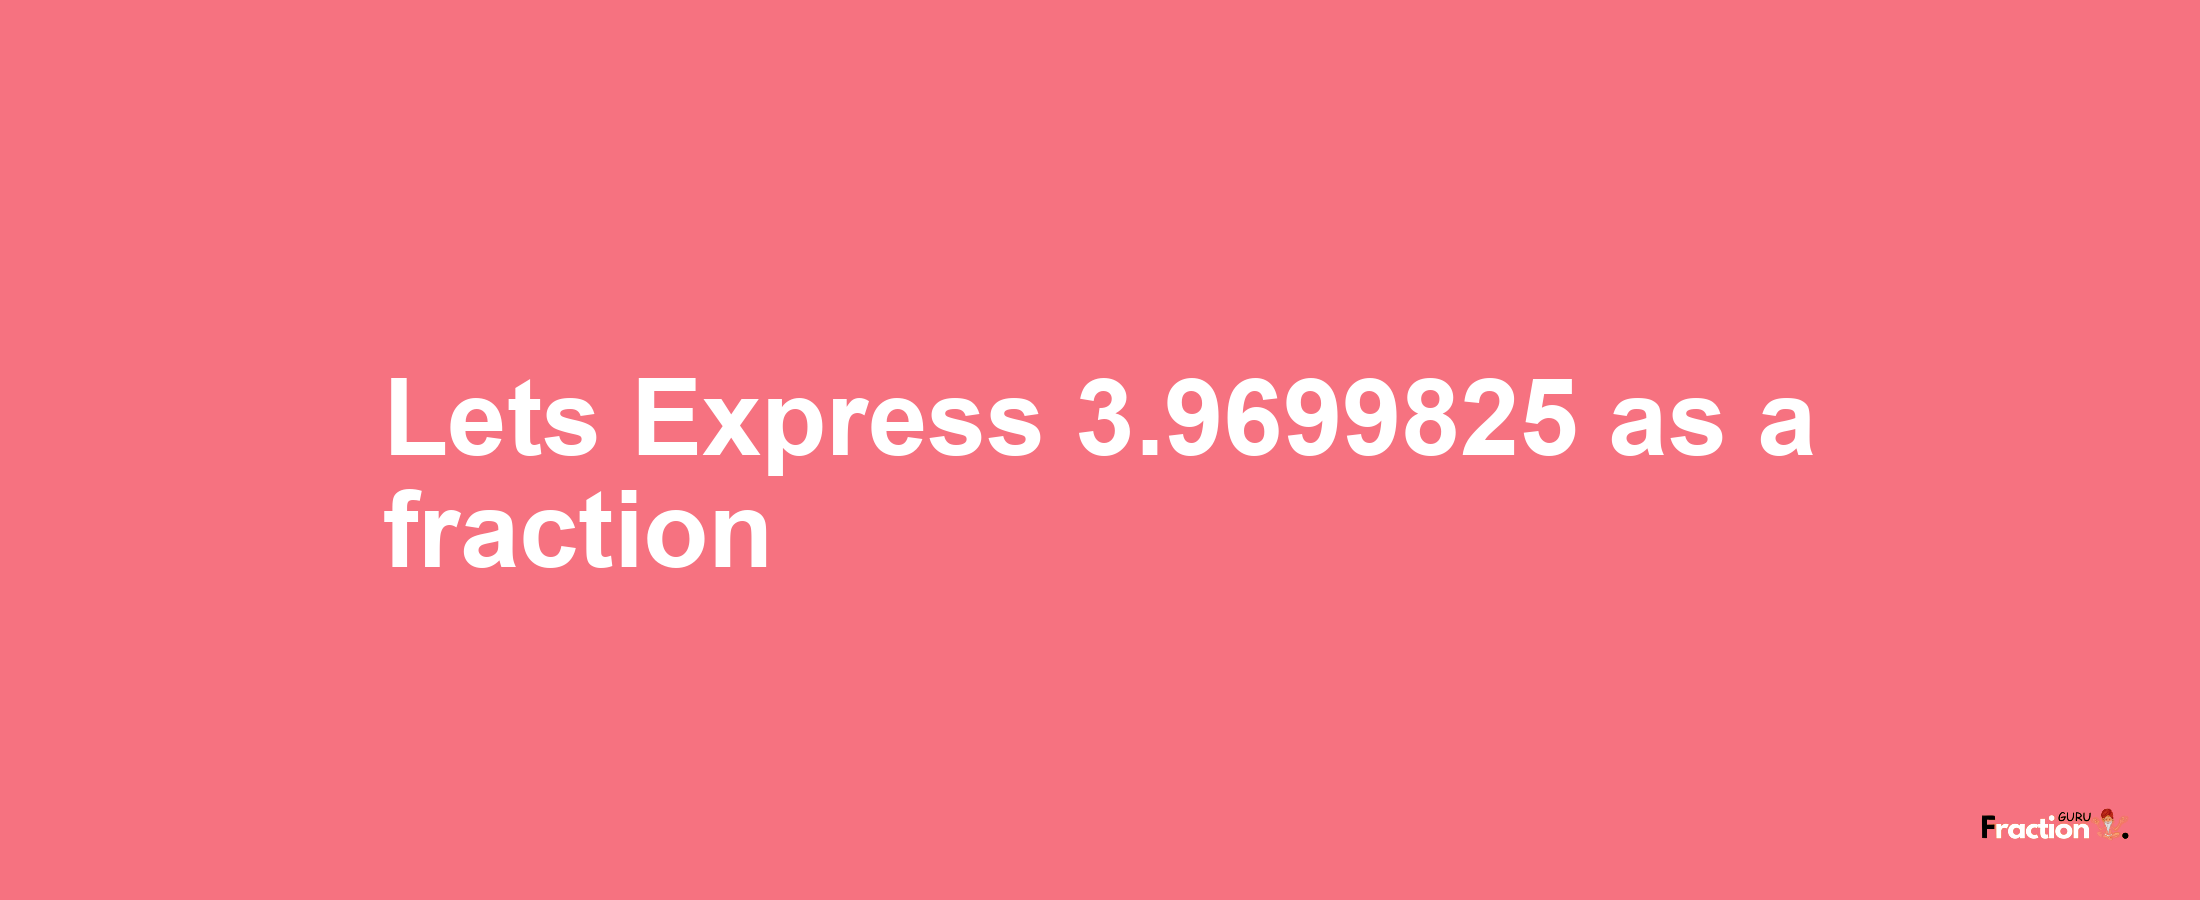 Lets Express 3.9699825 as afraction